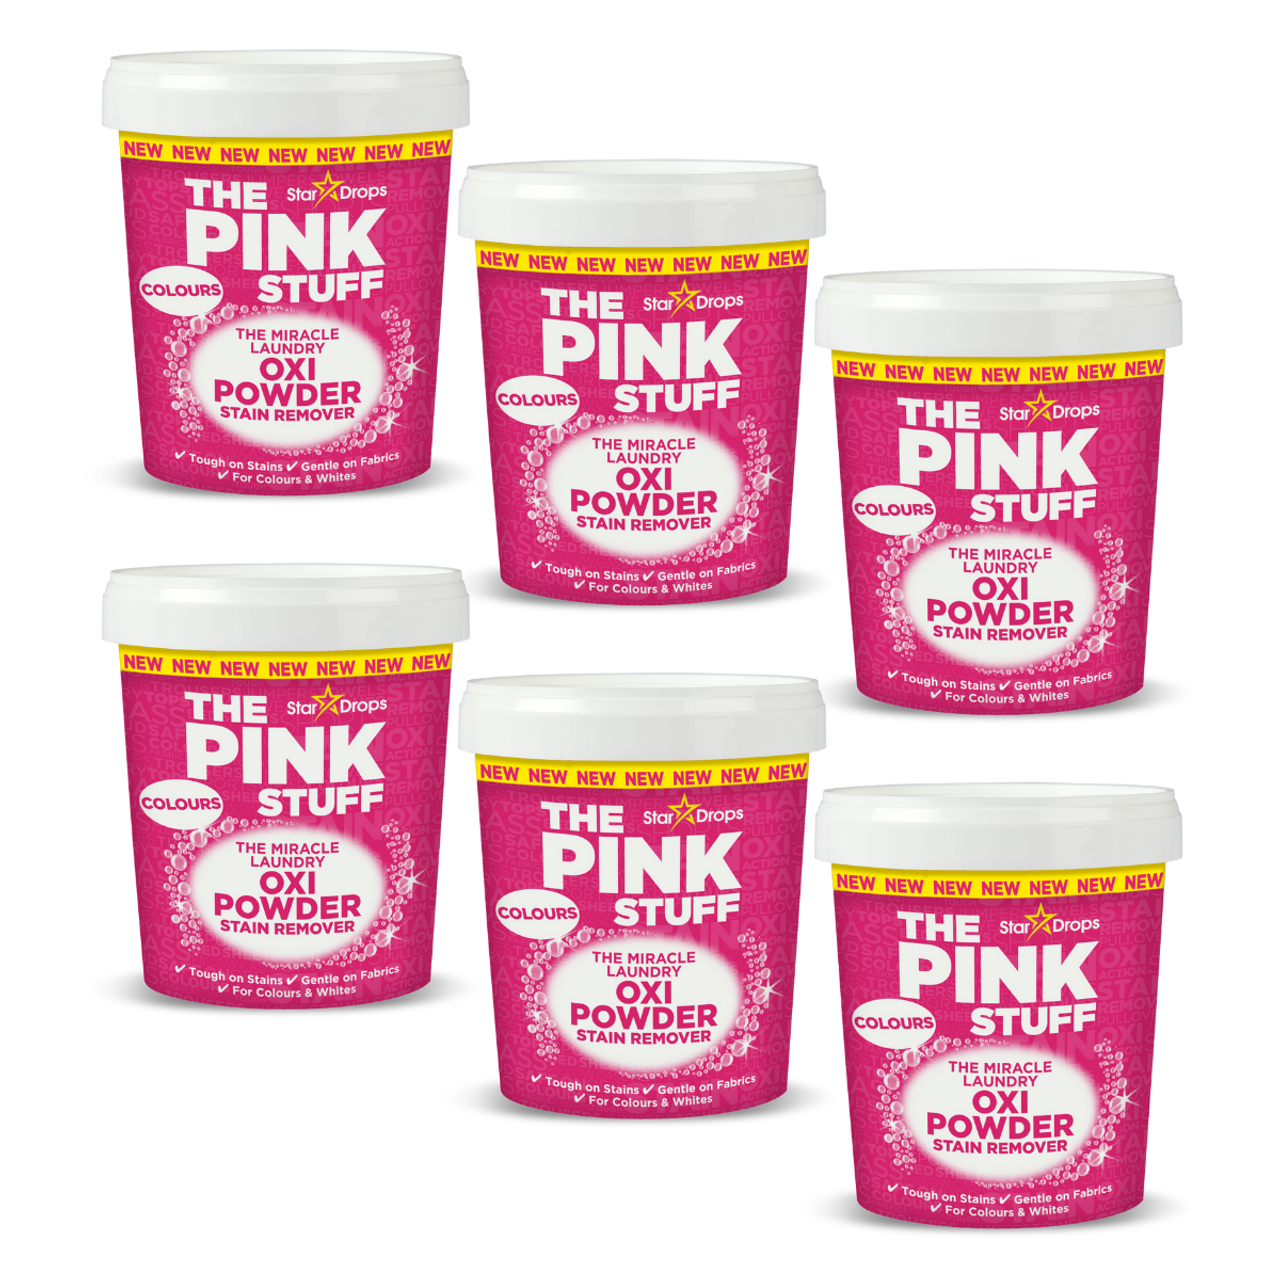 6 x The Pink Stuff - The Miracle Laundry Oxi Powder Stain Remover - Colours  (1kg)